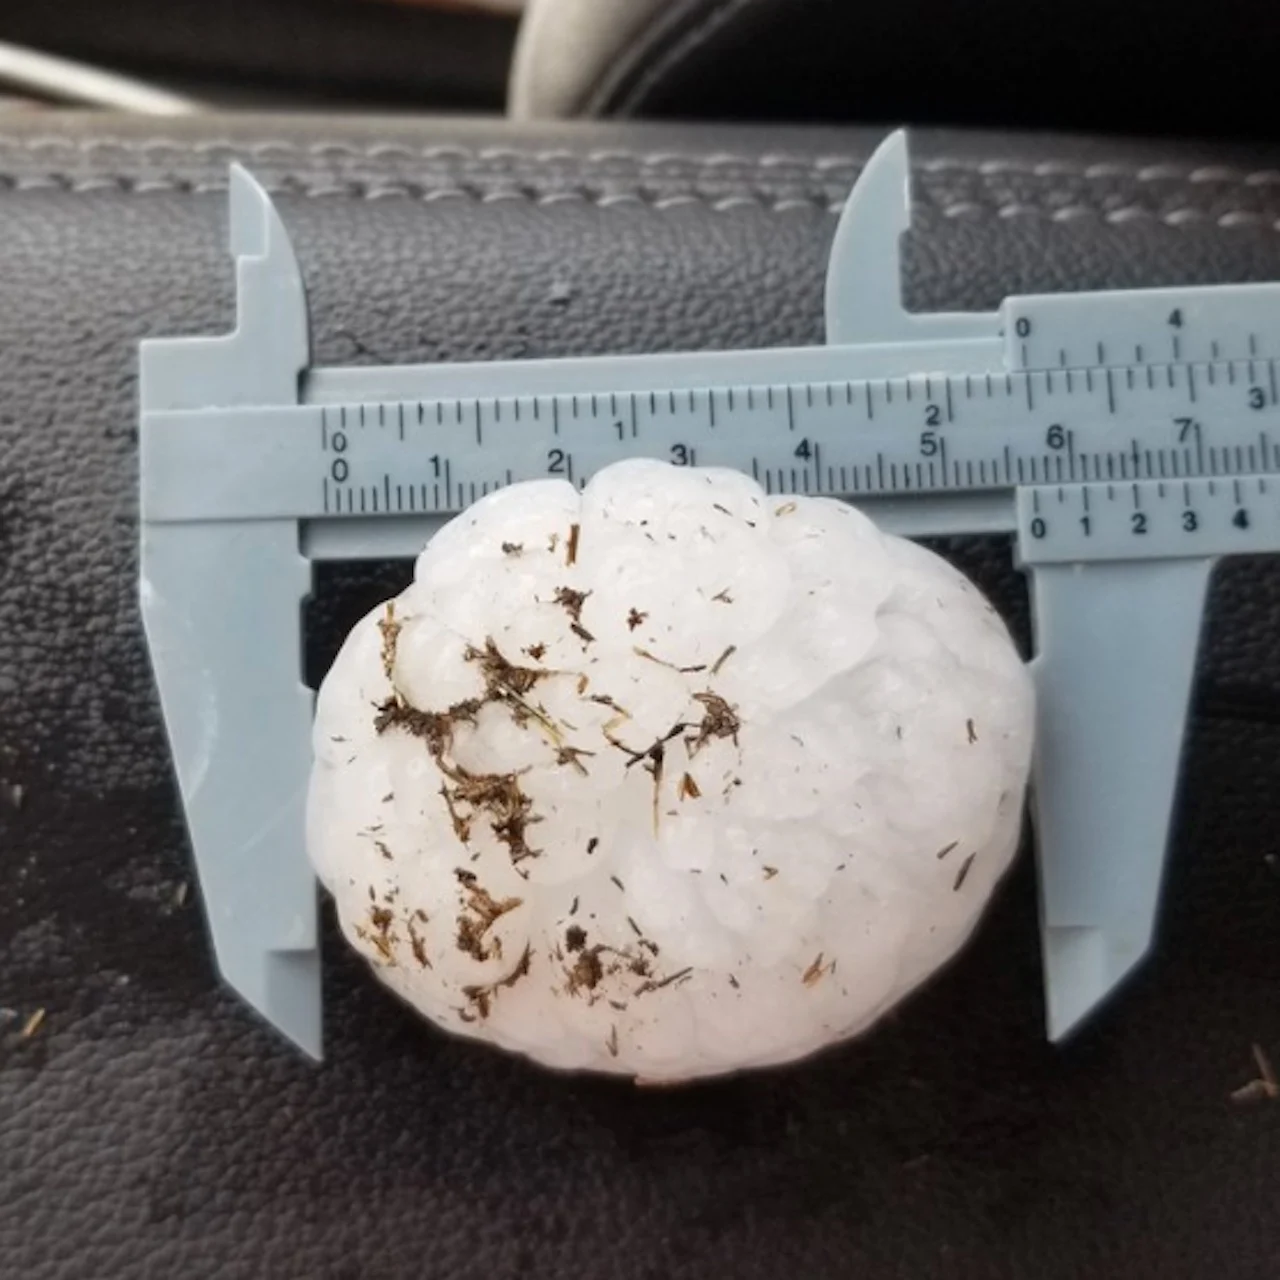 IN PHOTOS: Days of storms bring big hail, tornado-warned storms